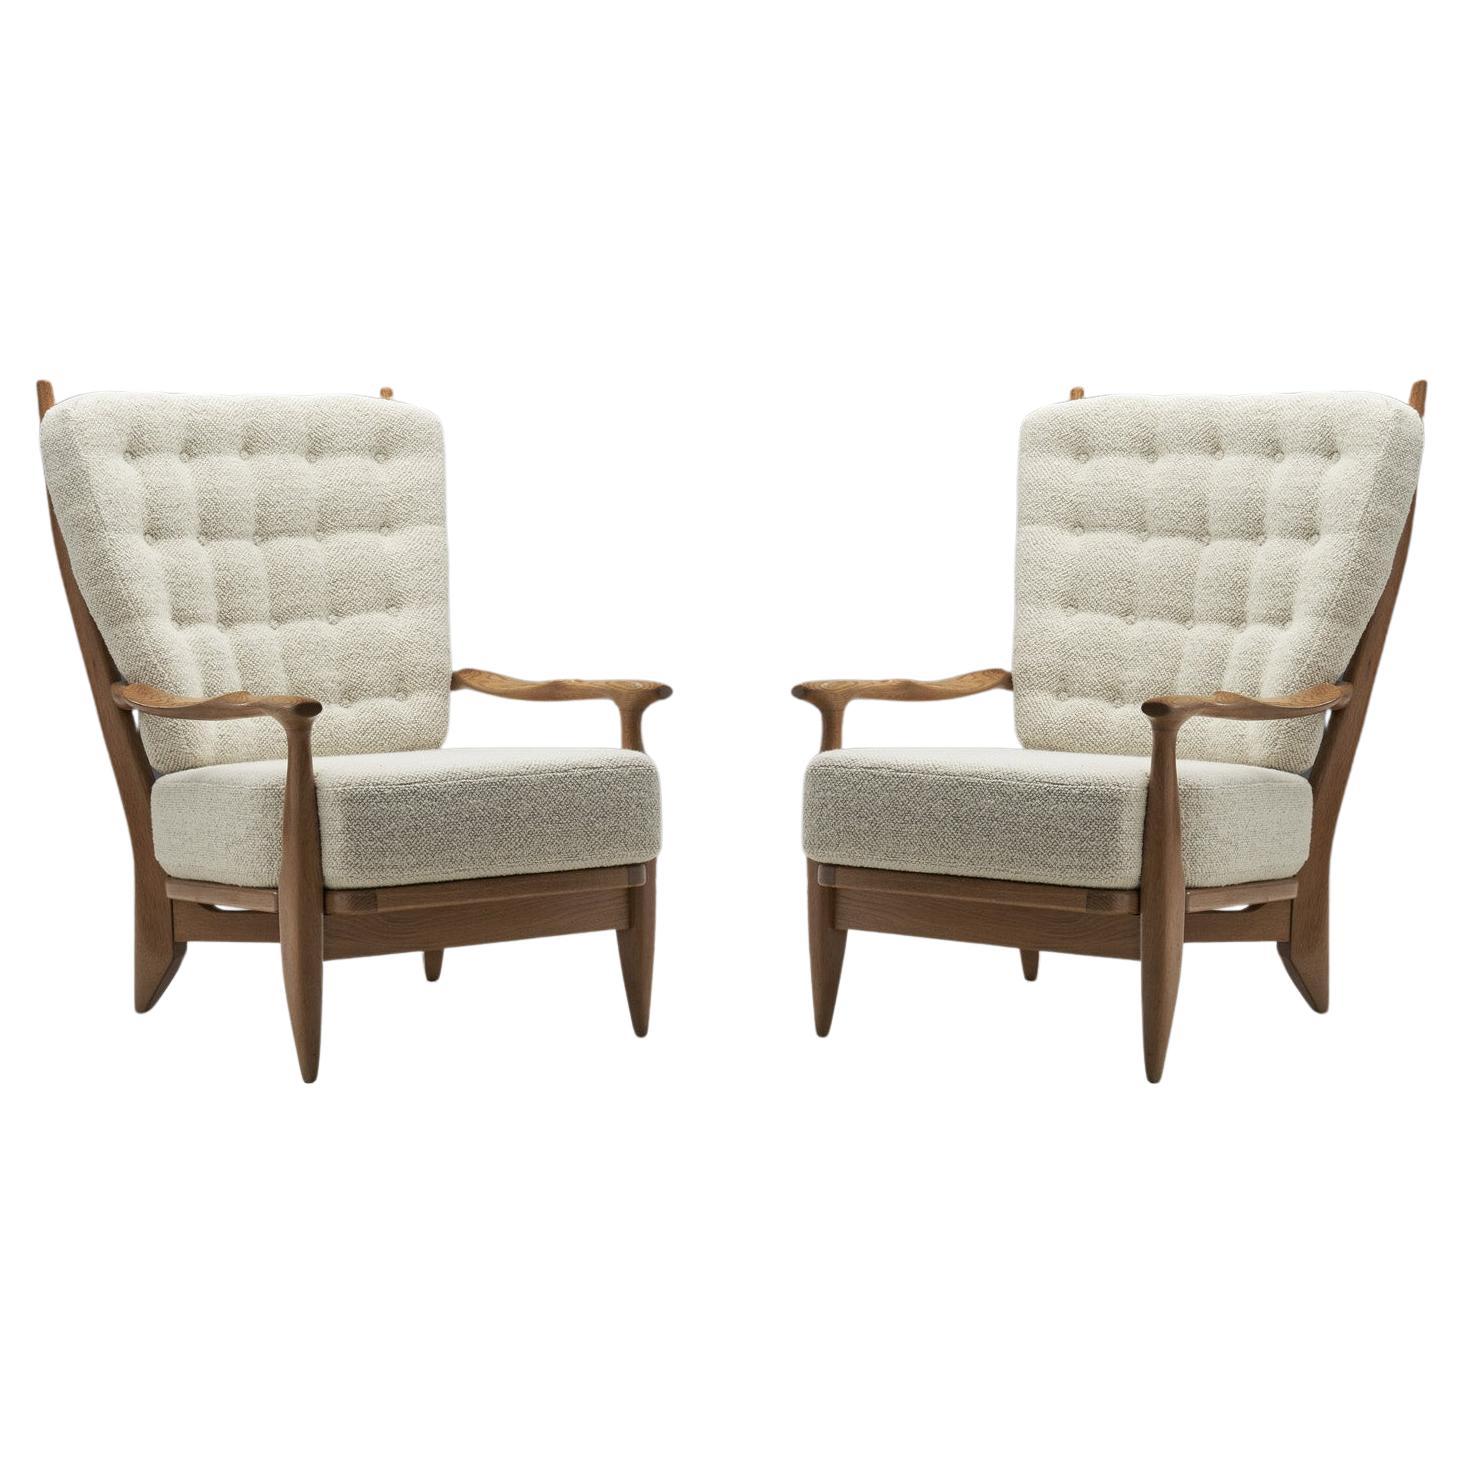 Pair of "Edouard" Lounge Chairs by Guillerme et Chambron, France 1960s